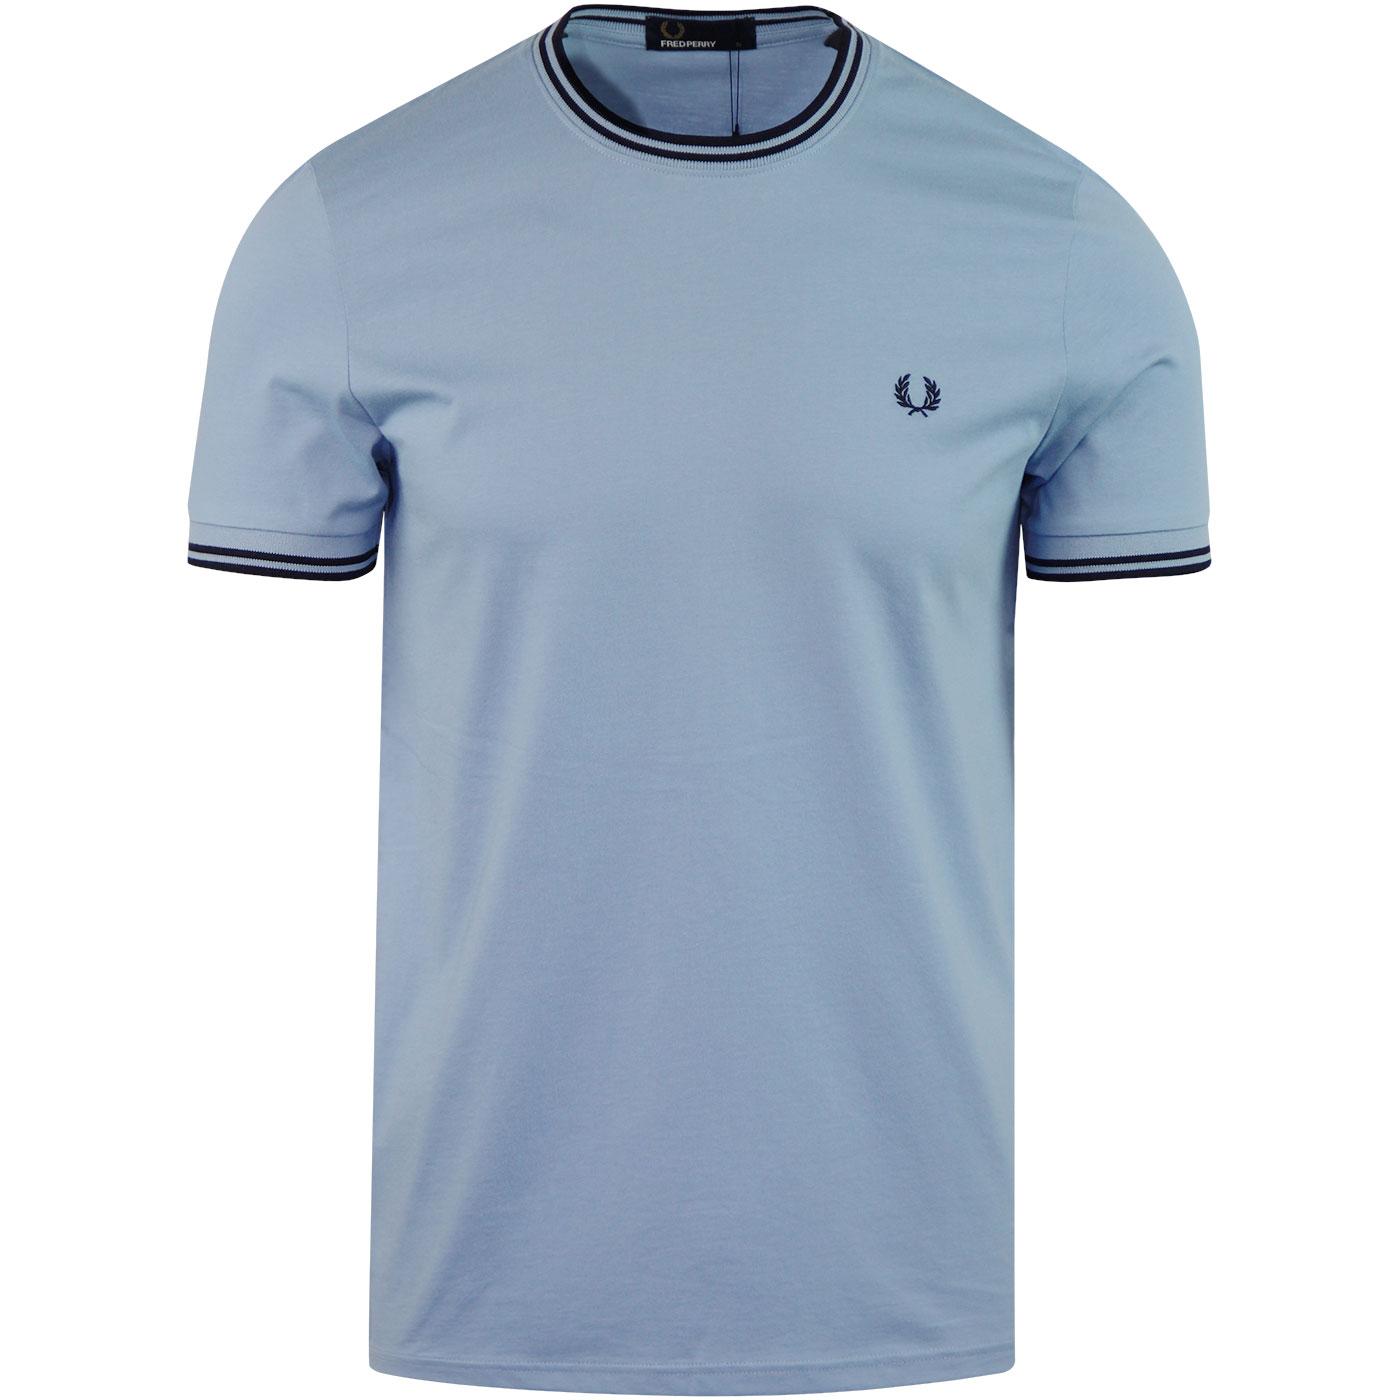 FRED PERRY Retro Mod Twin Tipped Crew Neck T-shirt in Sky